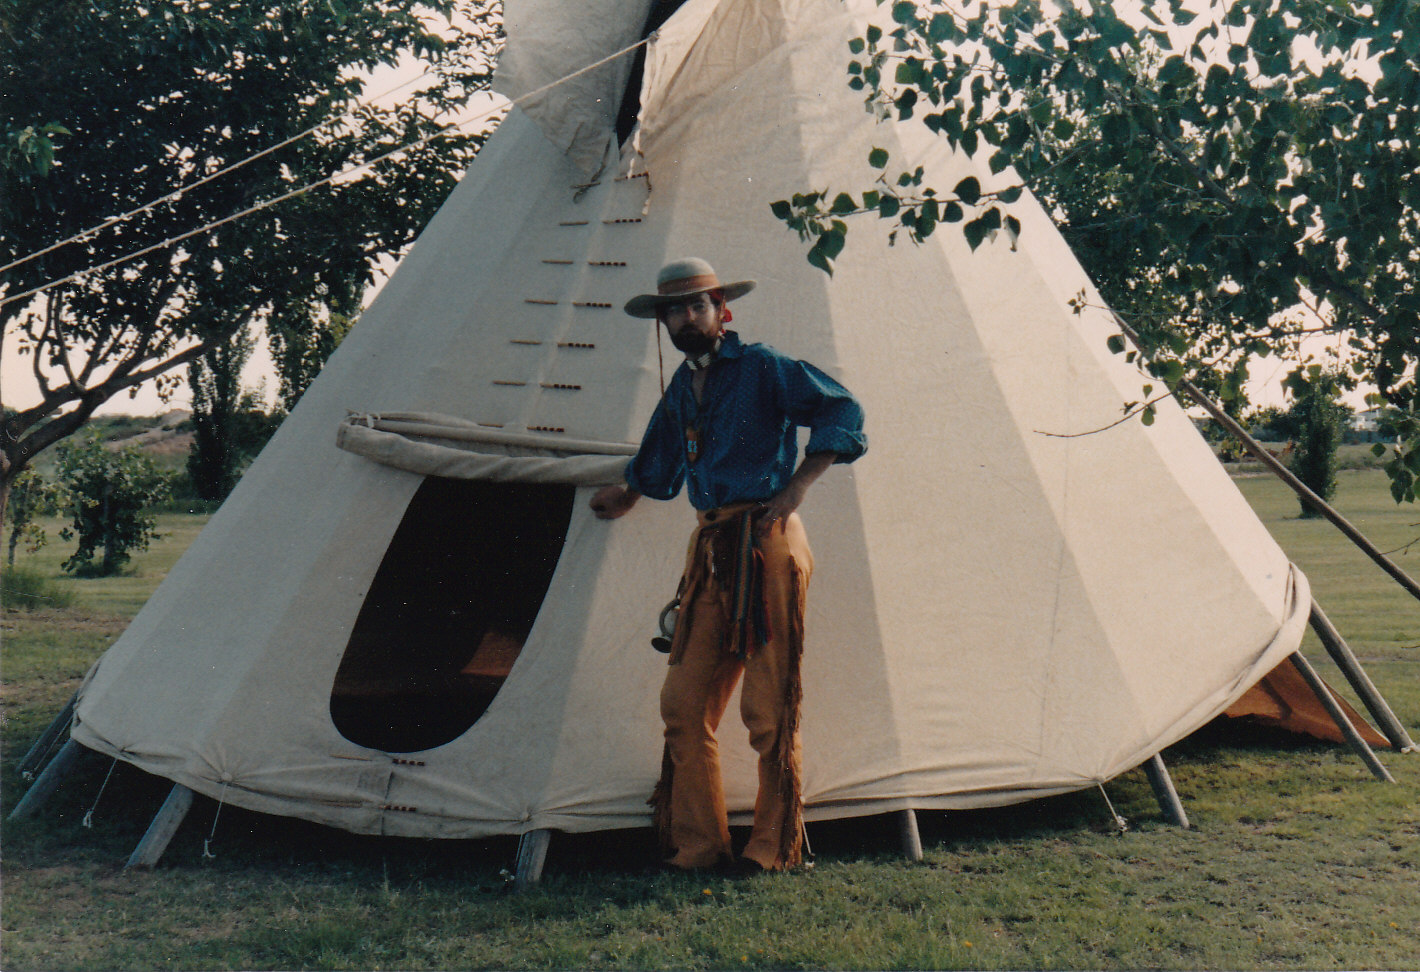 My mountain man days, standing next to my tipi at Jal Lake Park.